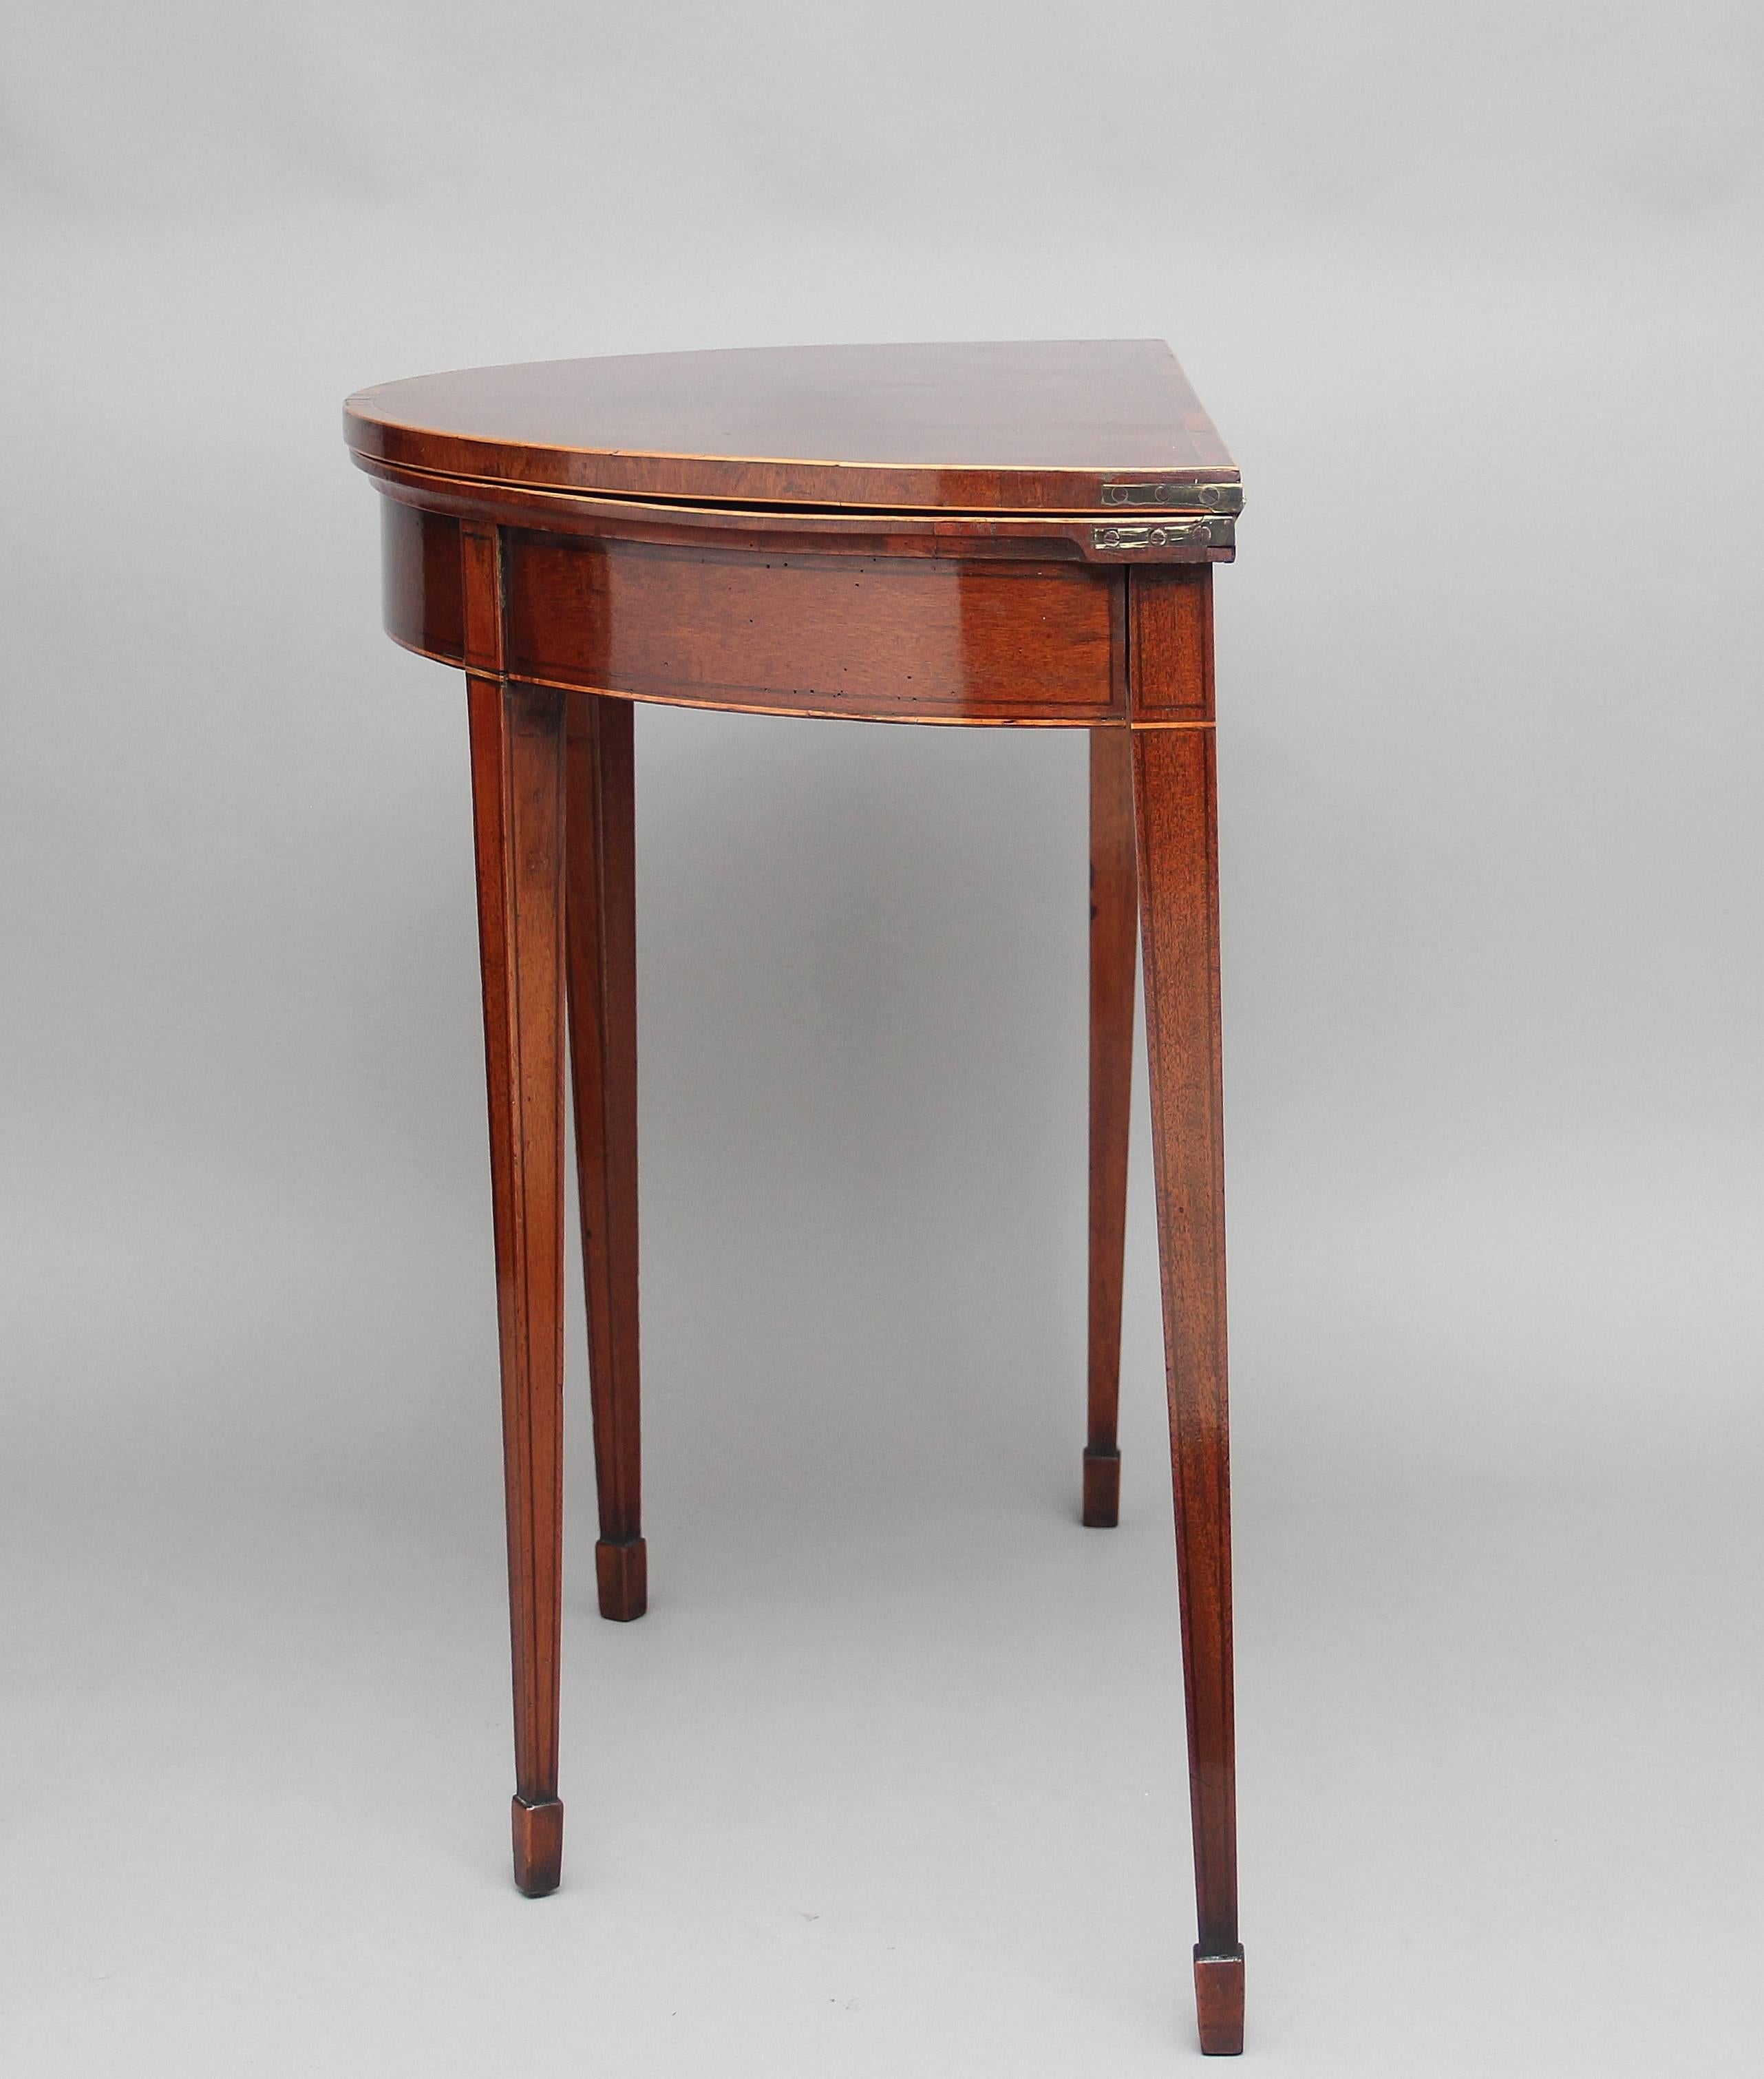 Early 19th century mahogany demilune card table, the semi circular crossbanded top with boxwood stringing opening to reveal a green baize playing surface, supported on square tapered legs terminating with spade feet, circa 1800.